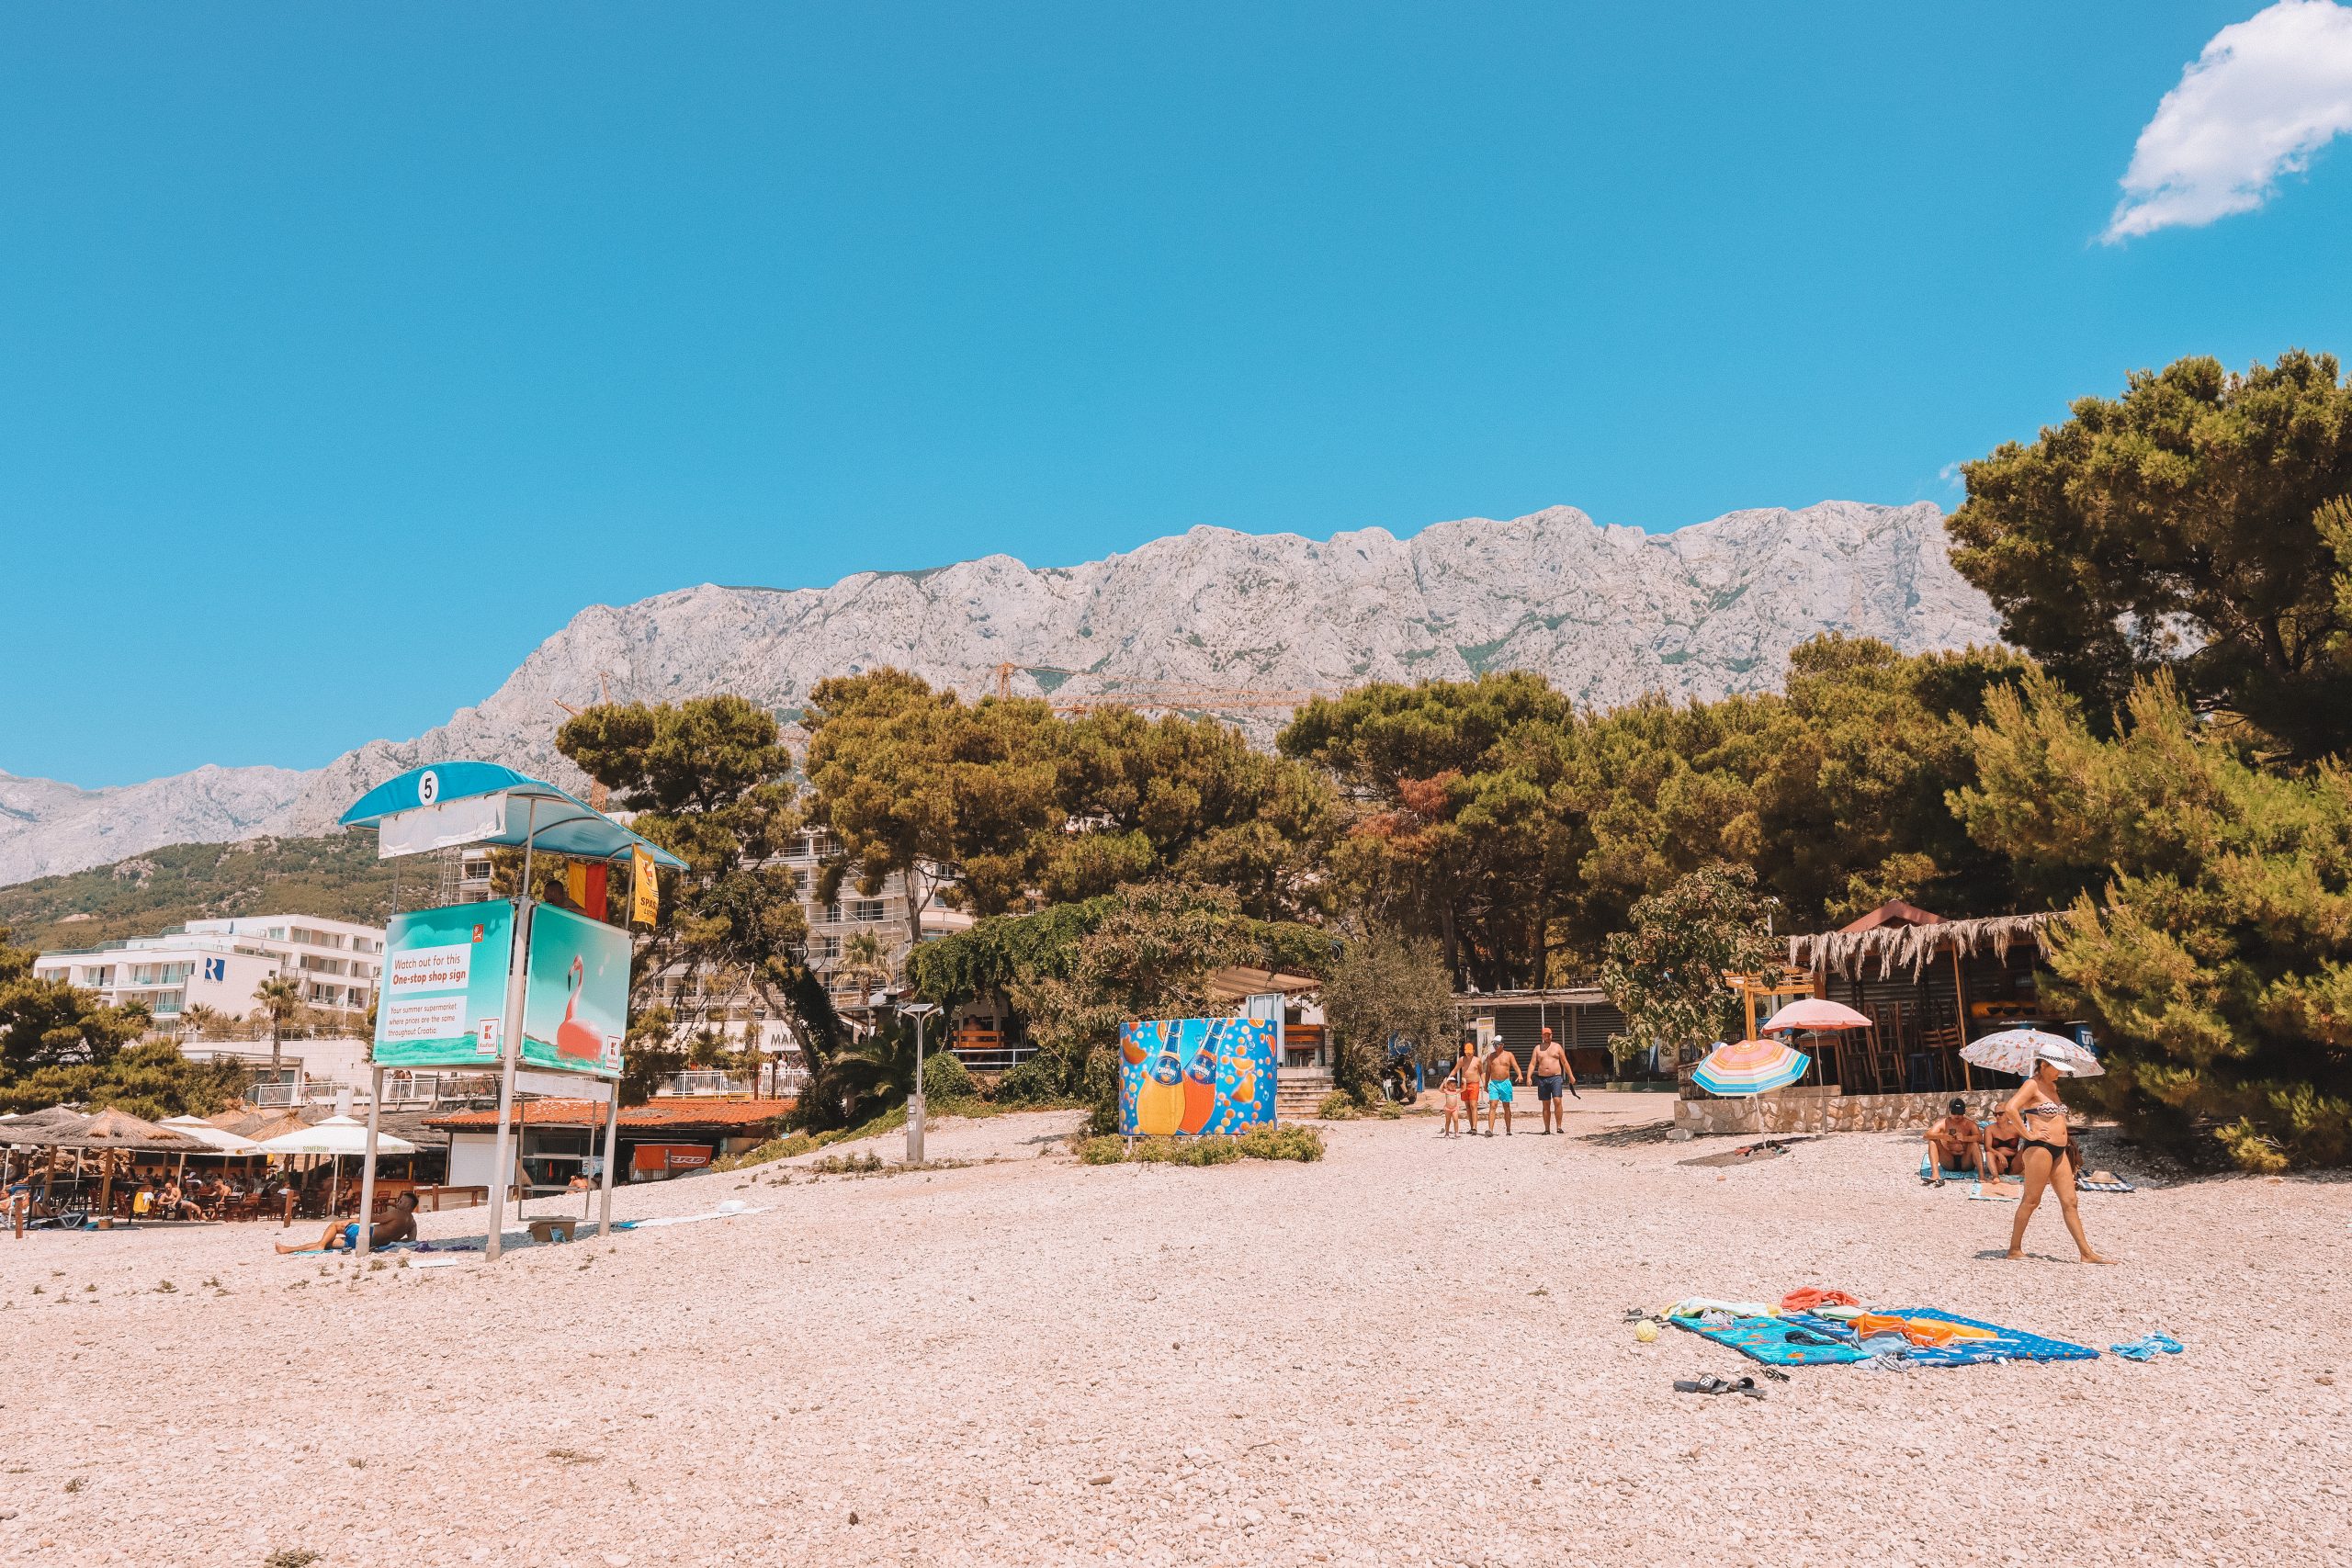 Cvitačka Beach with mountains in the background. Things to do in the Croatian Riviera